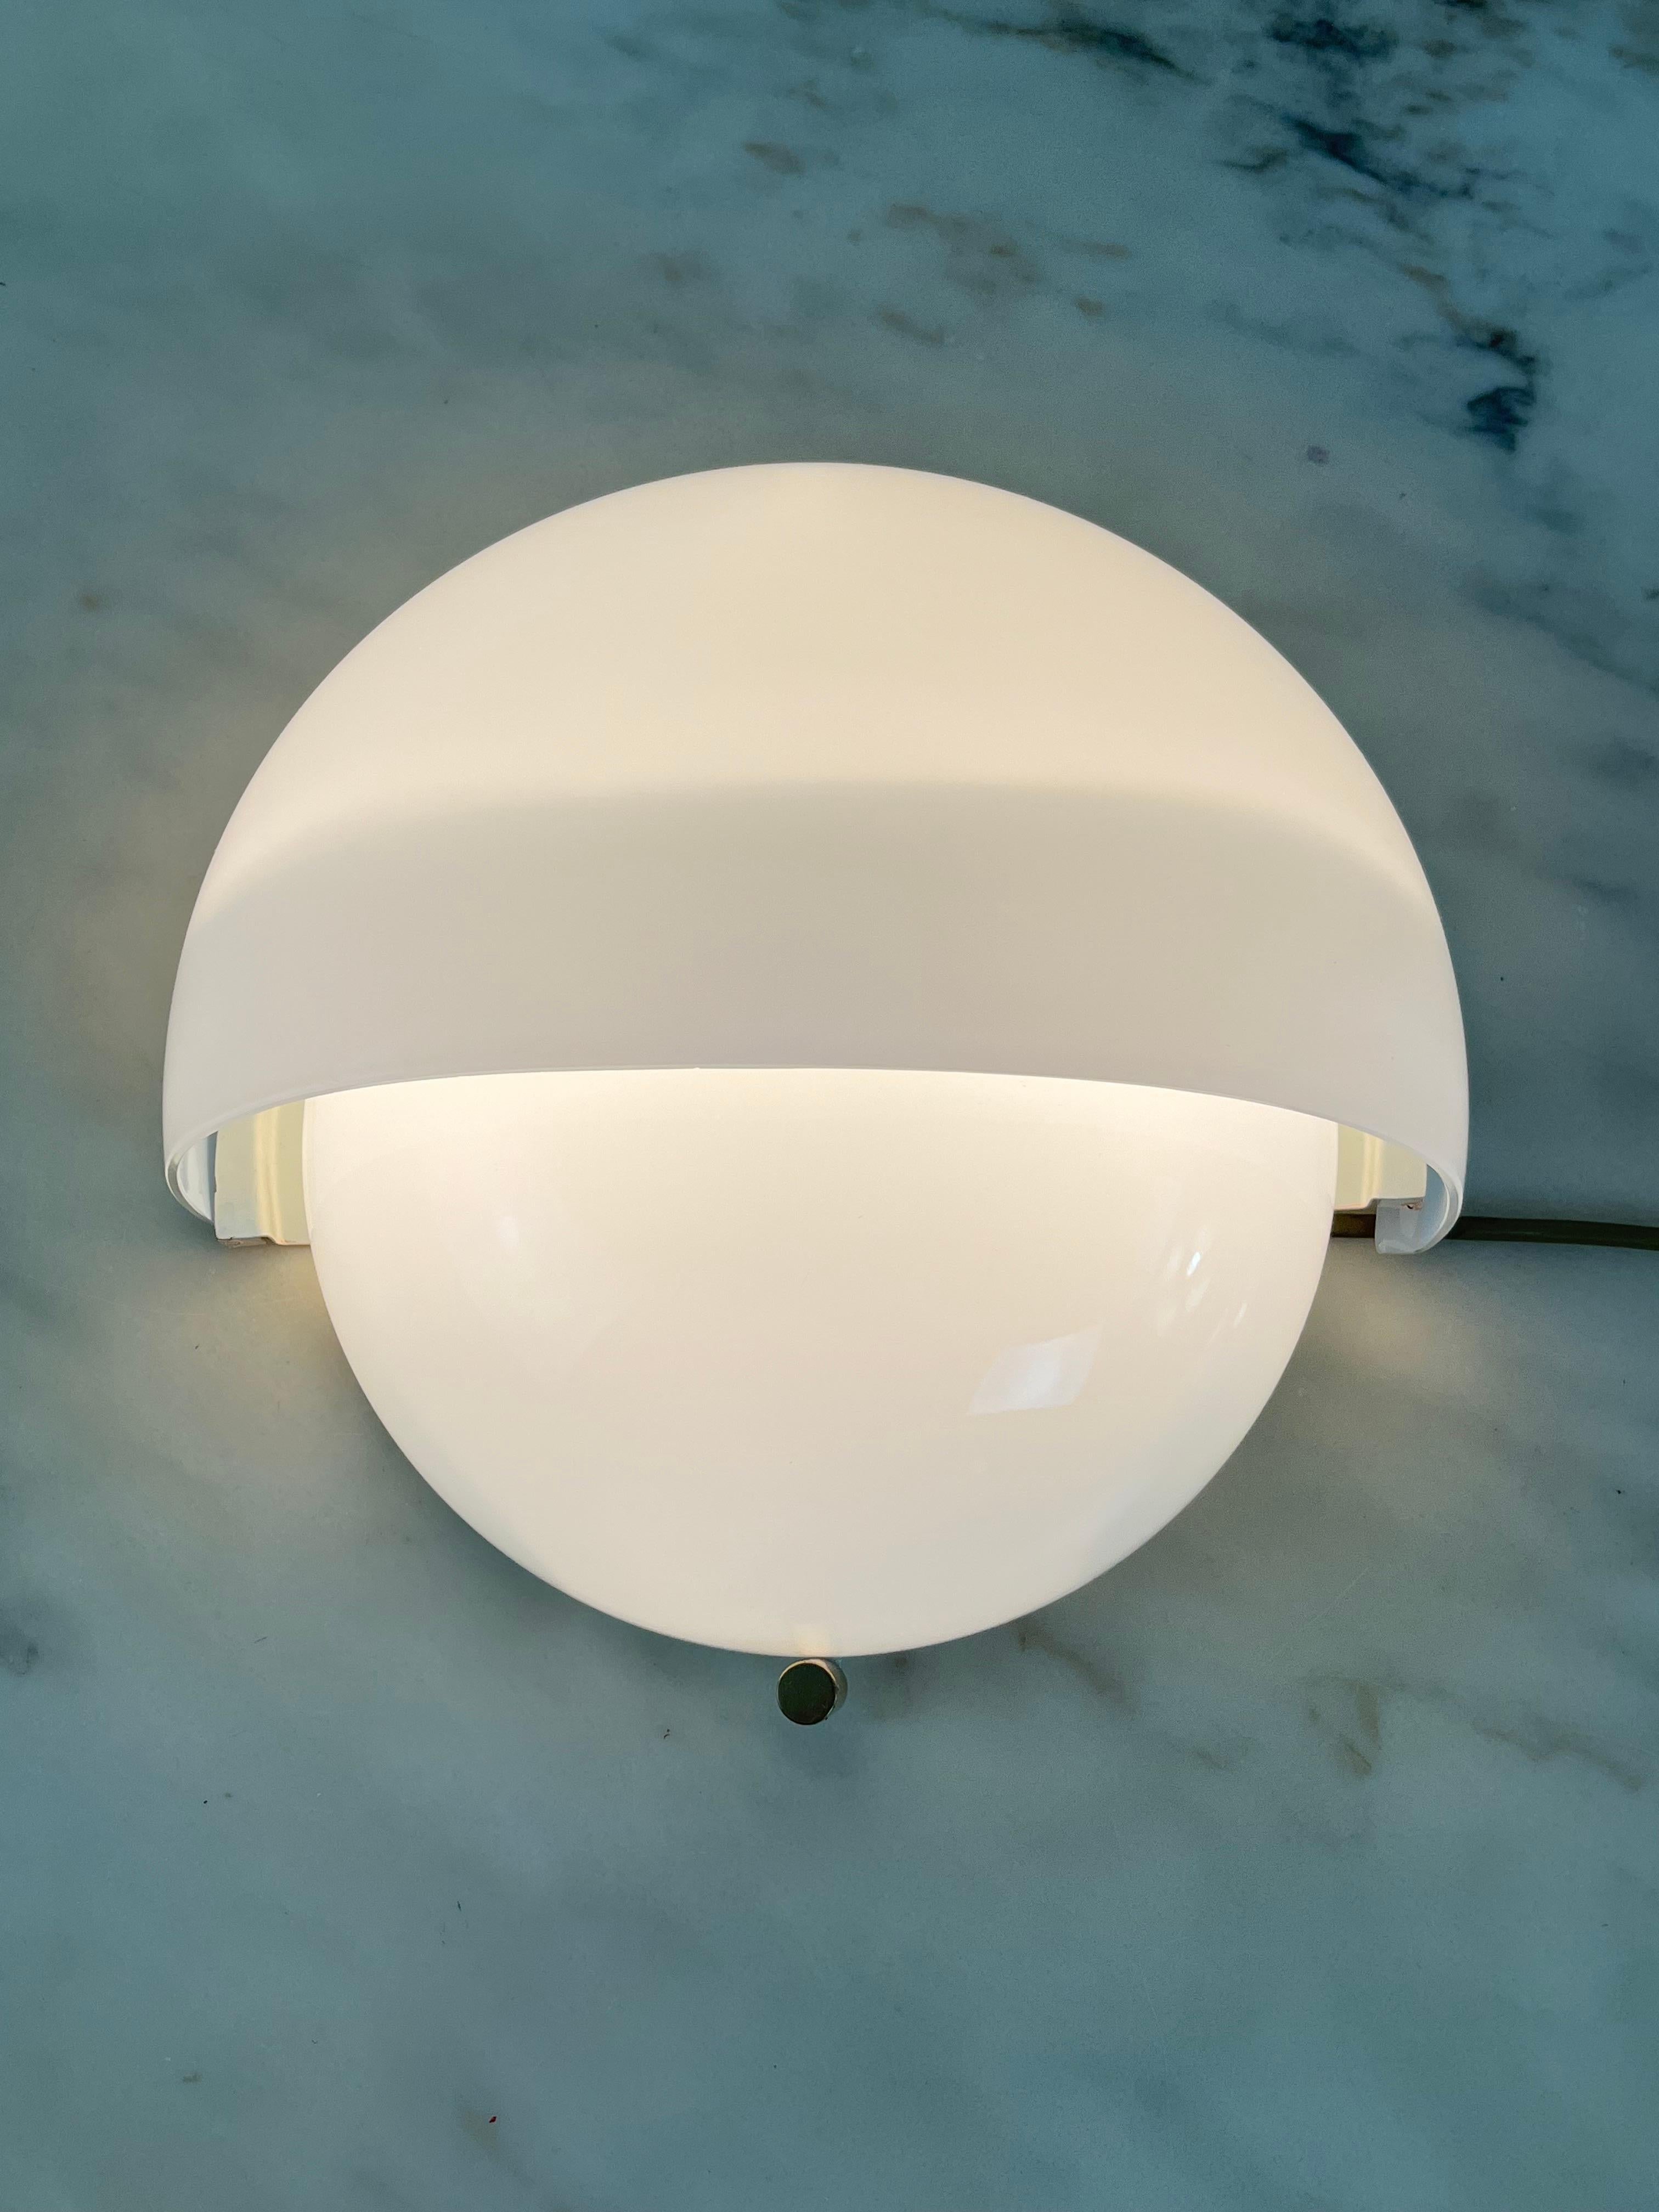 Mid-20th Century Large Murano Glass Wall Lamp By Vico Magistretti For Artemide Mania Model 1960s For Sale